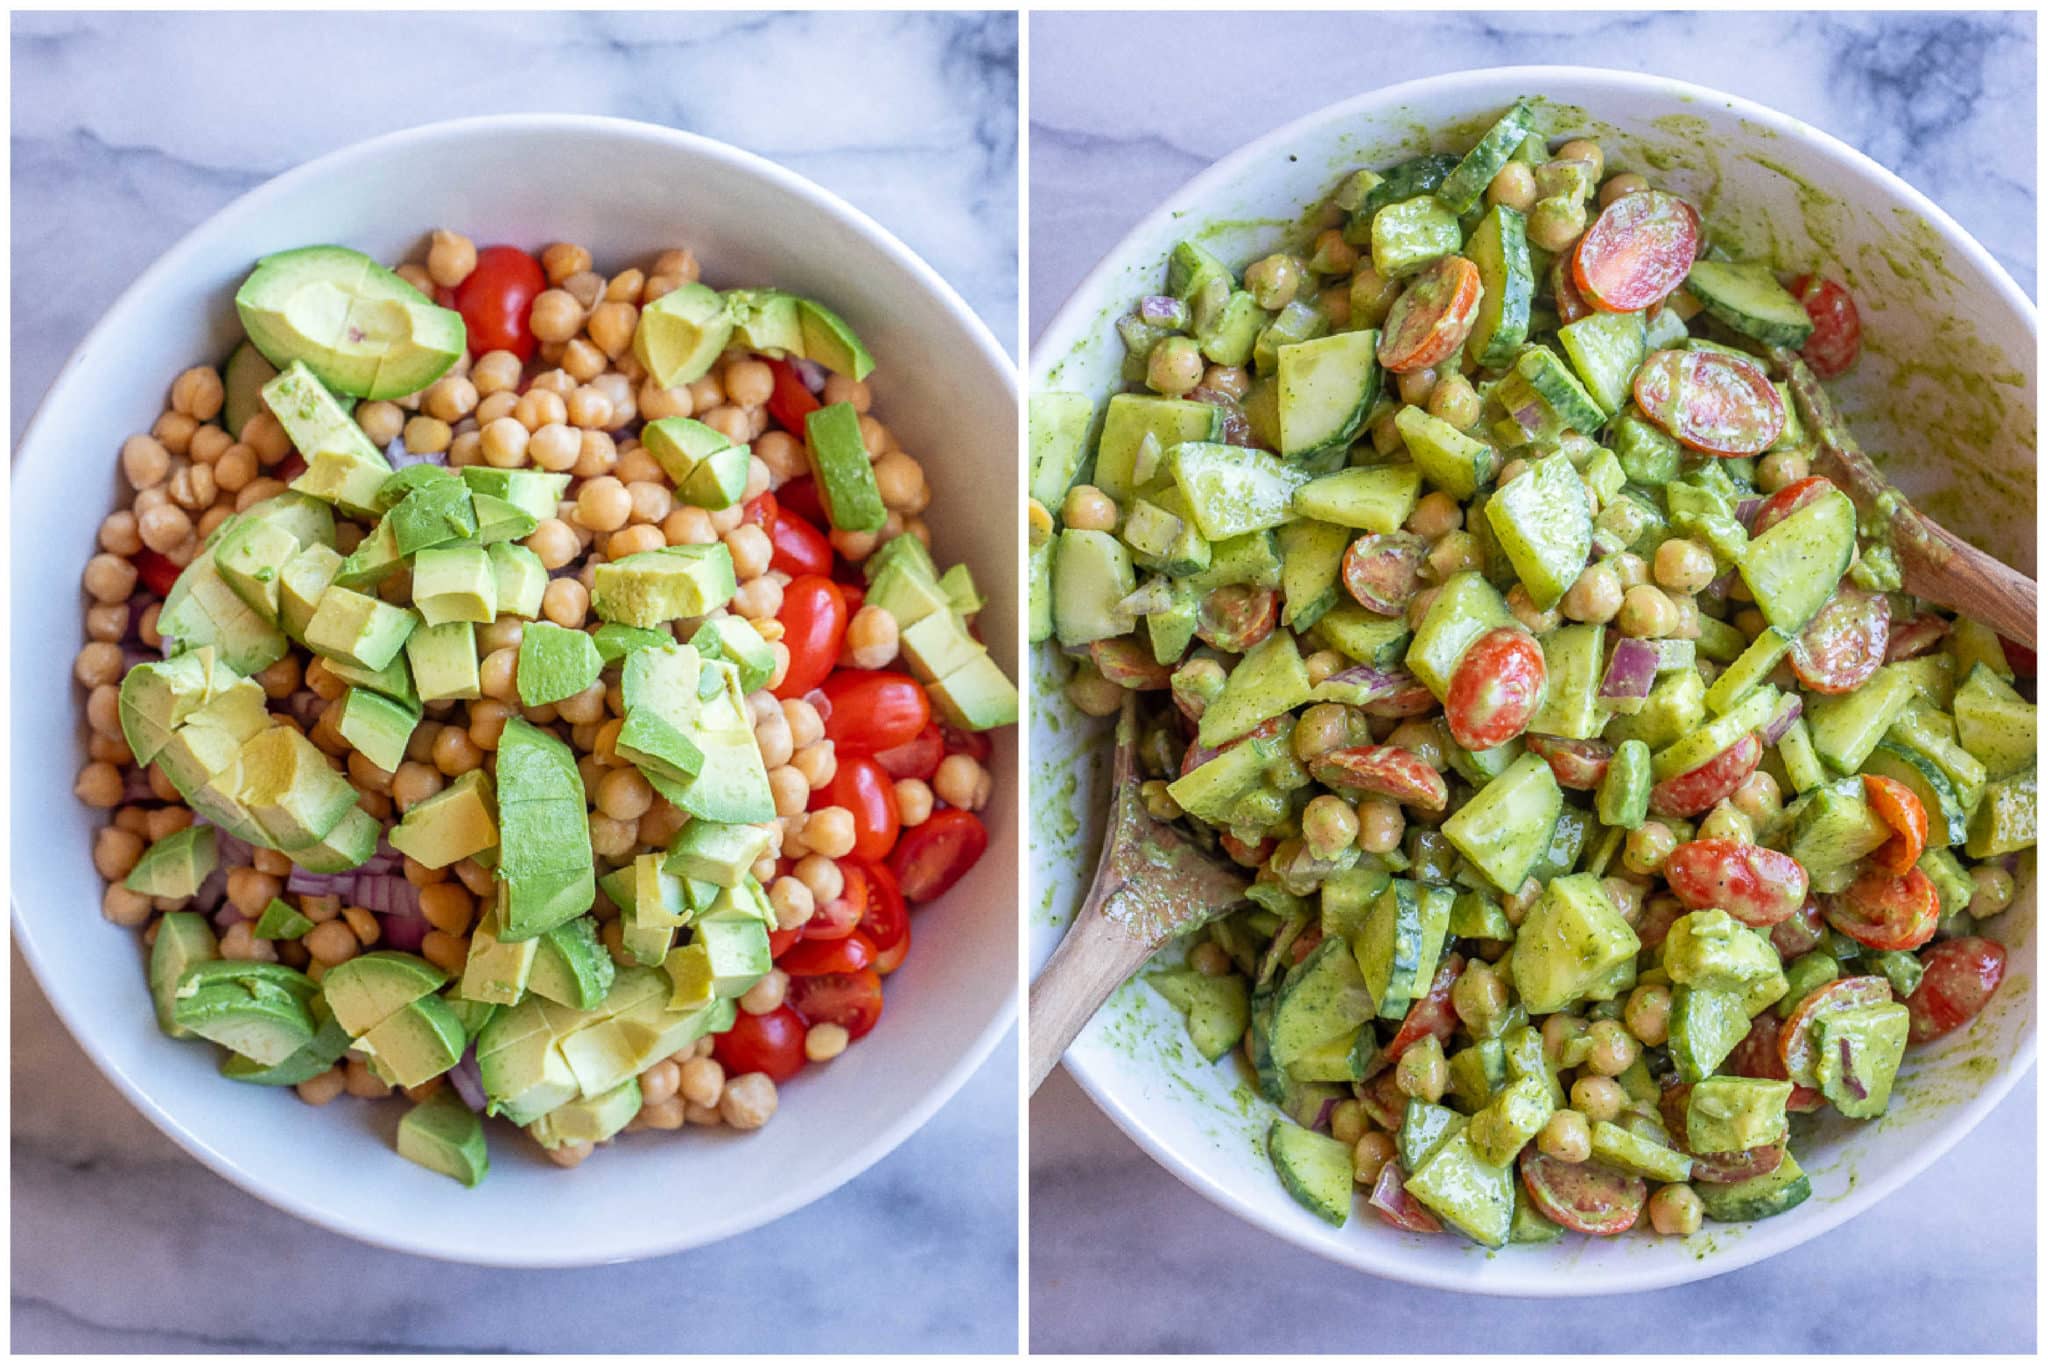 avocado cucumber tomato salad before and after it's been mixed with the dressing